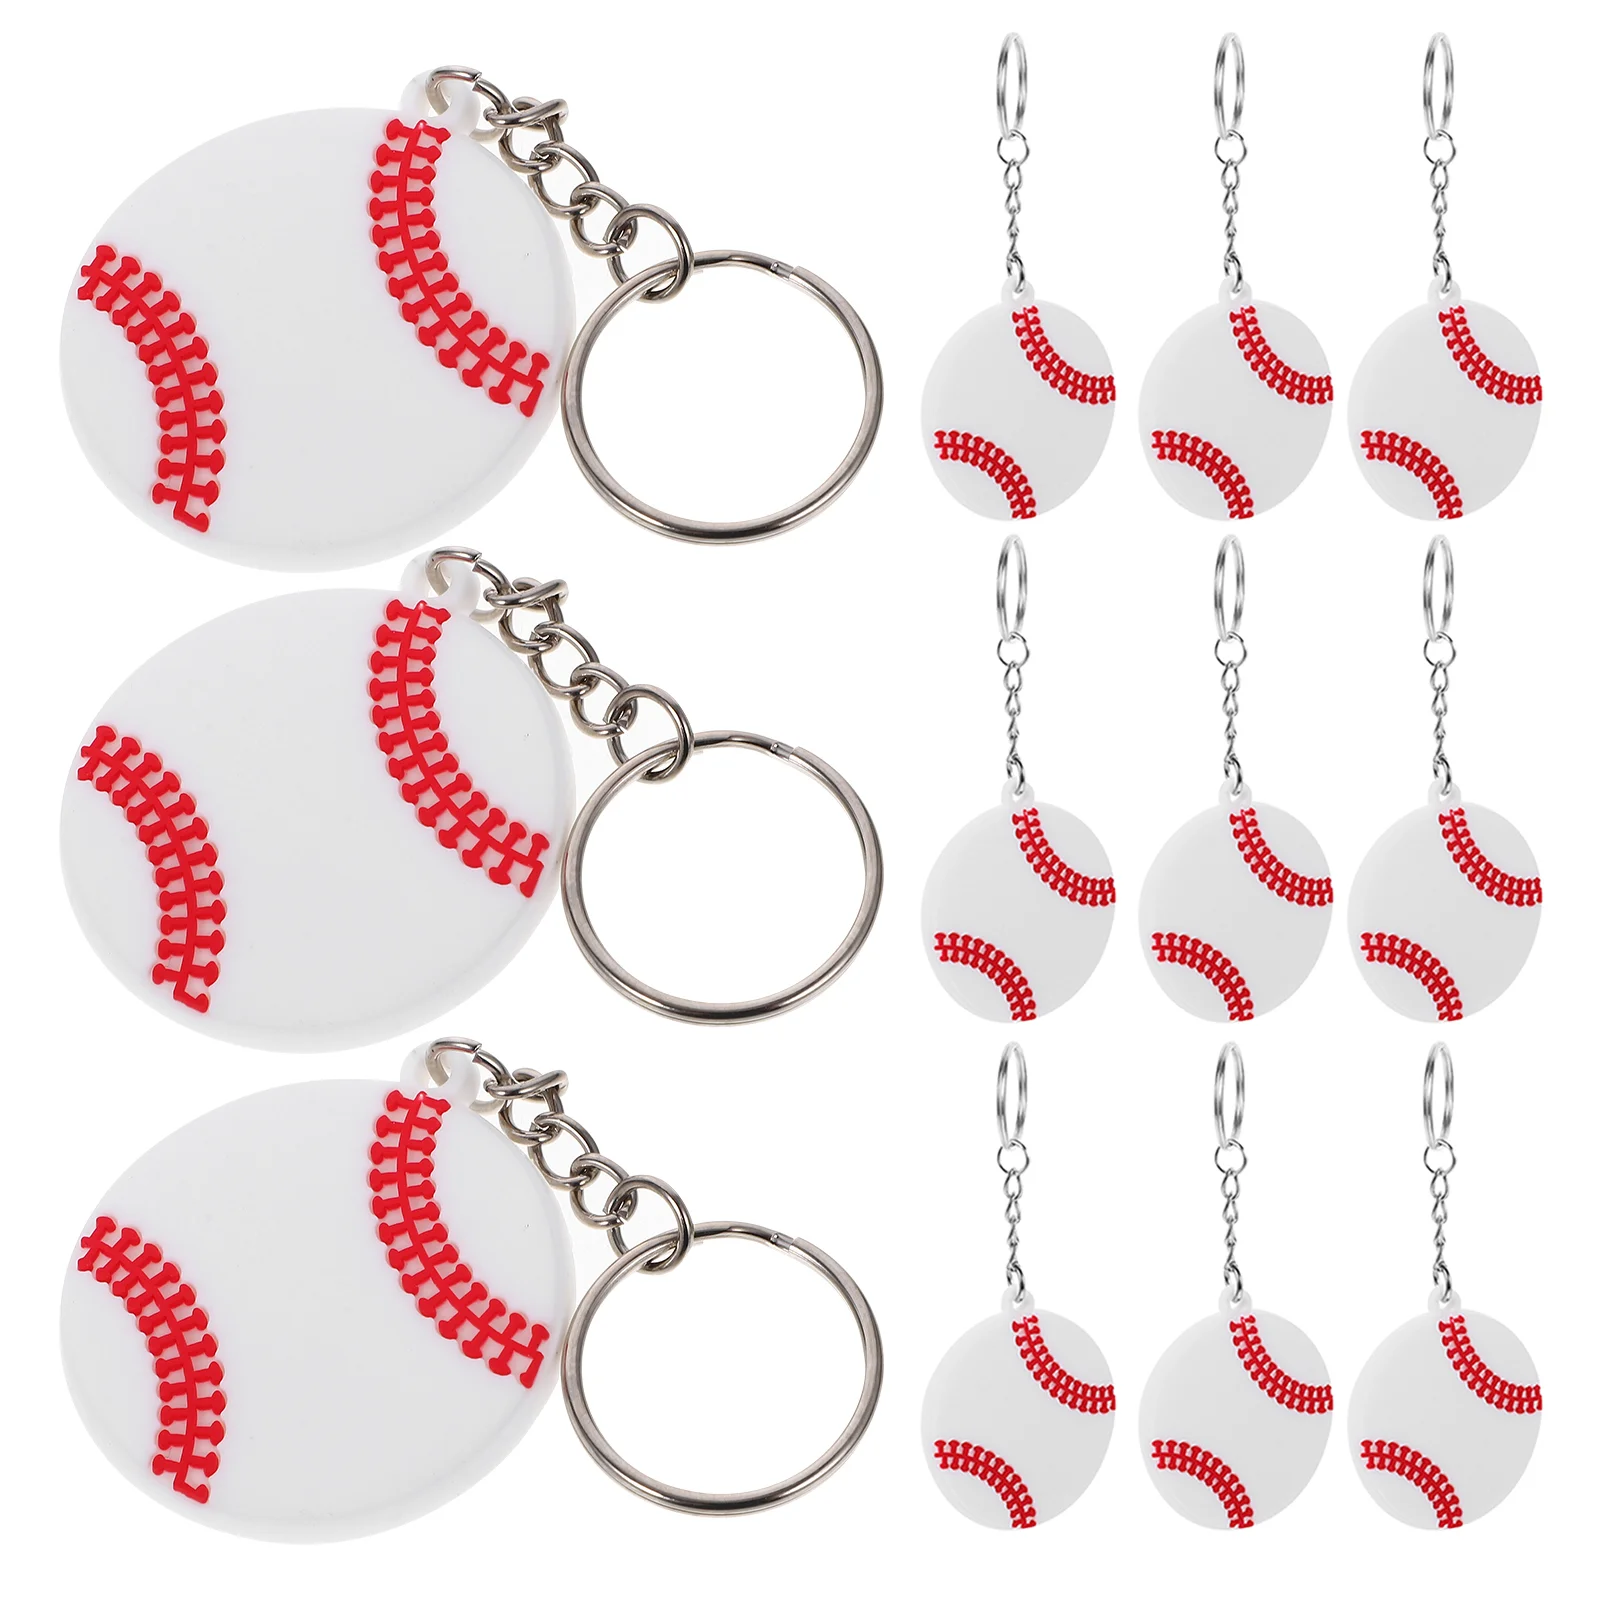 20 Pcs Volleyball Key Ring Volleyball Keychain Volleyball Charms Sports Keychain Sports Party Favors 6pcs soccer keychains sports ball key ring mini football key pendant backpack hanging charms